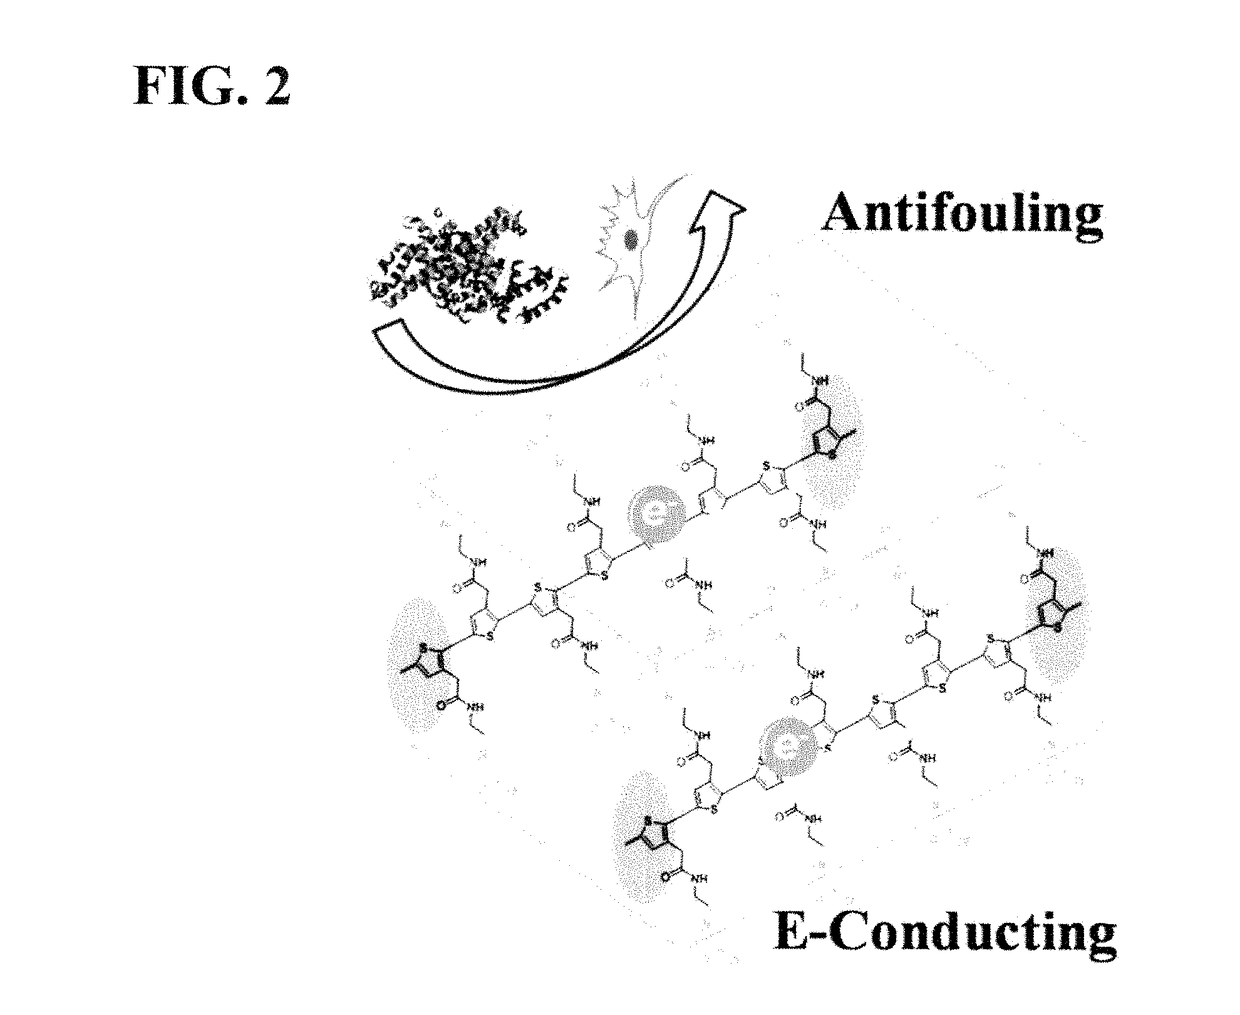 Integrated zwitterionic conjugated polymers for bioelectronics, biosensing, regenerative medicine, and energy applications